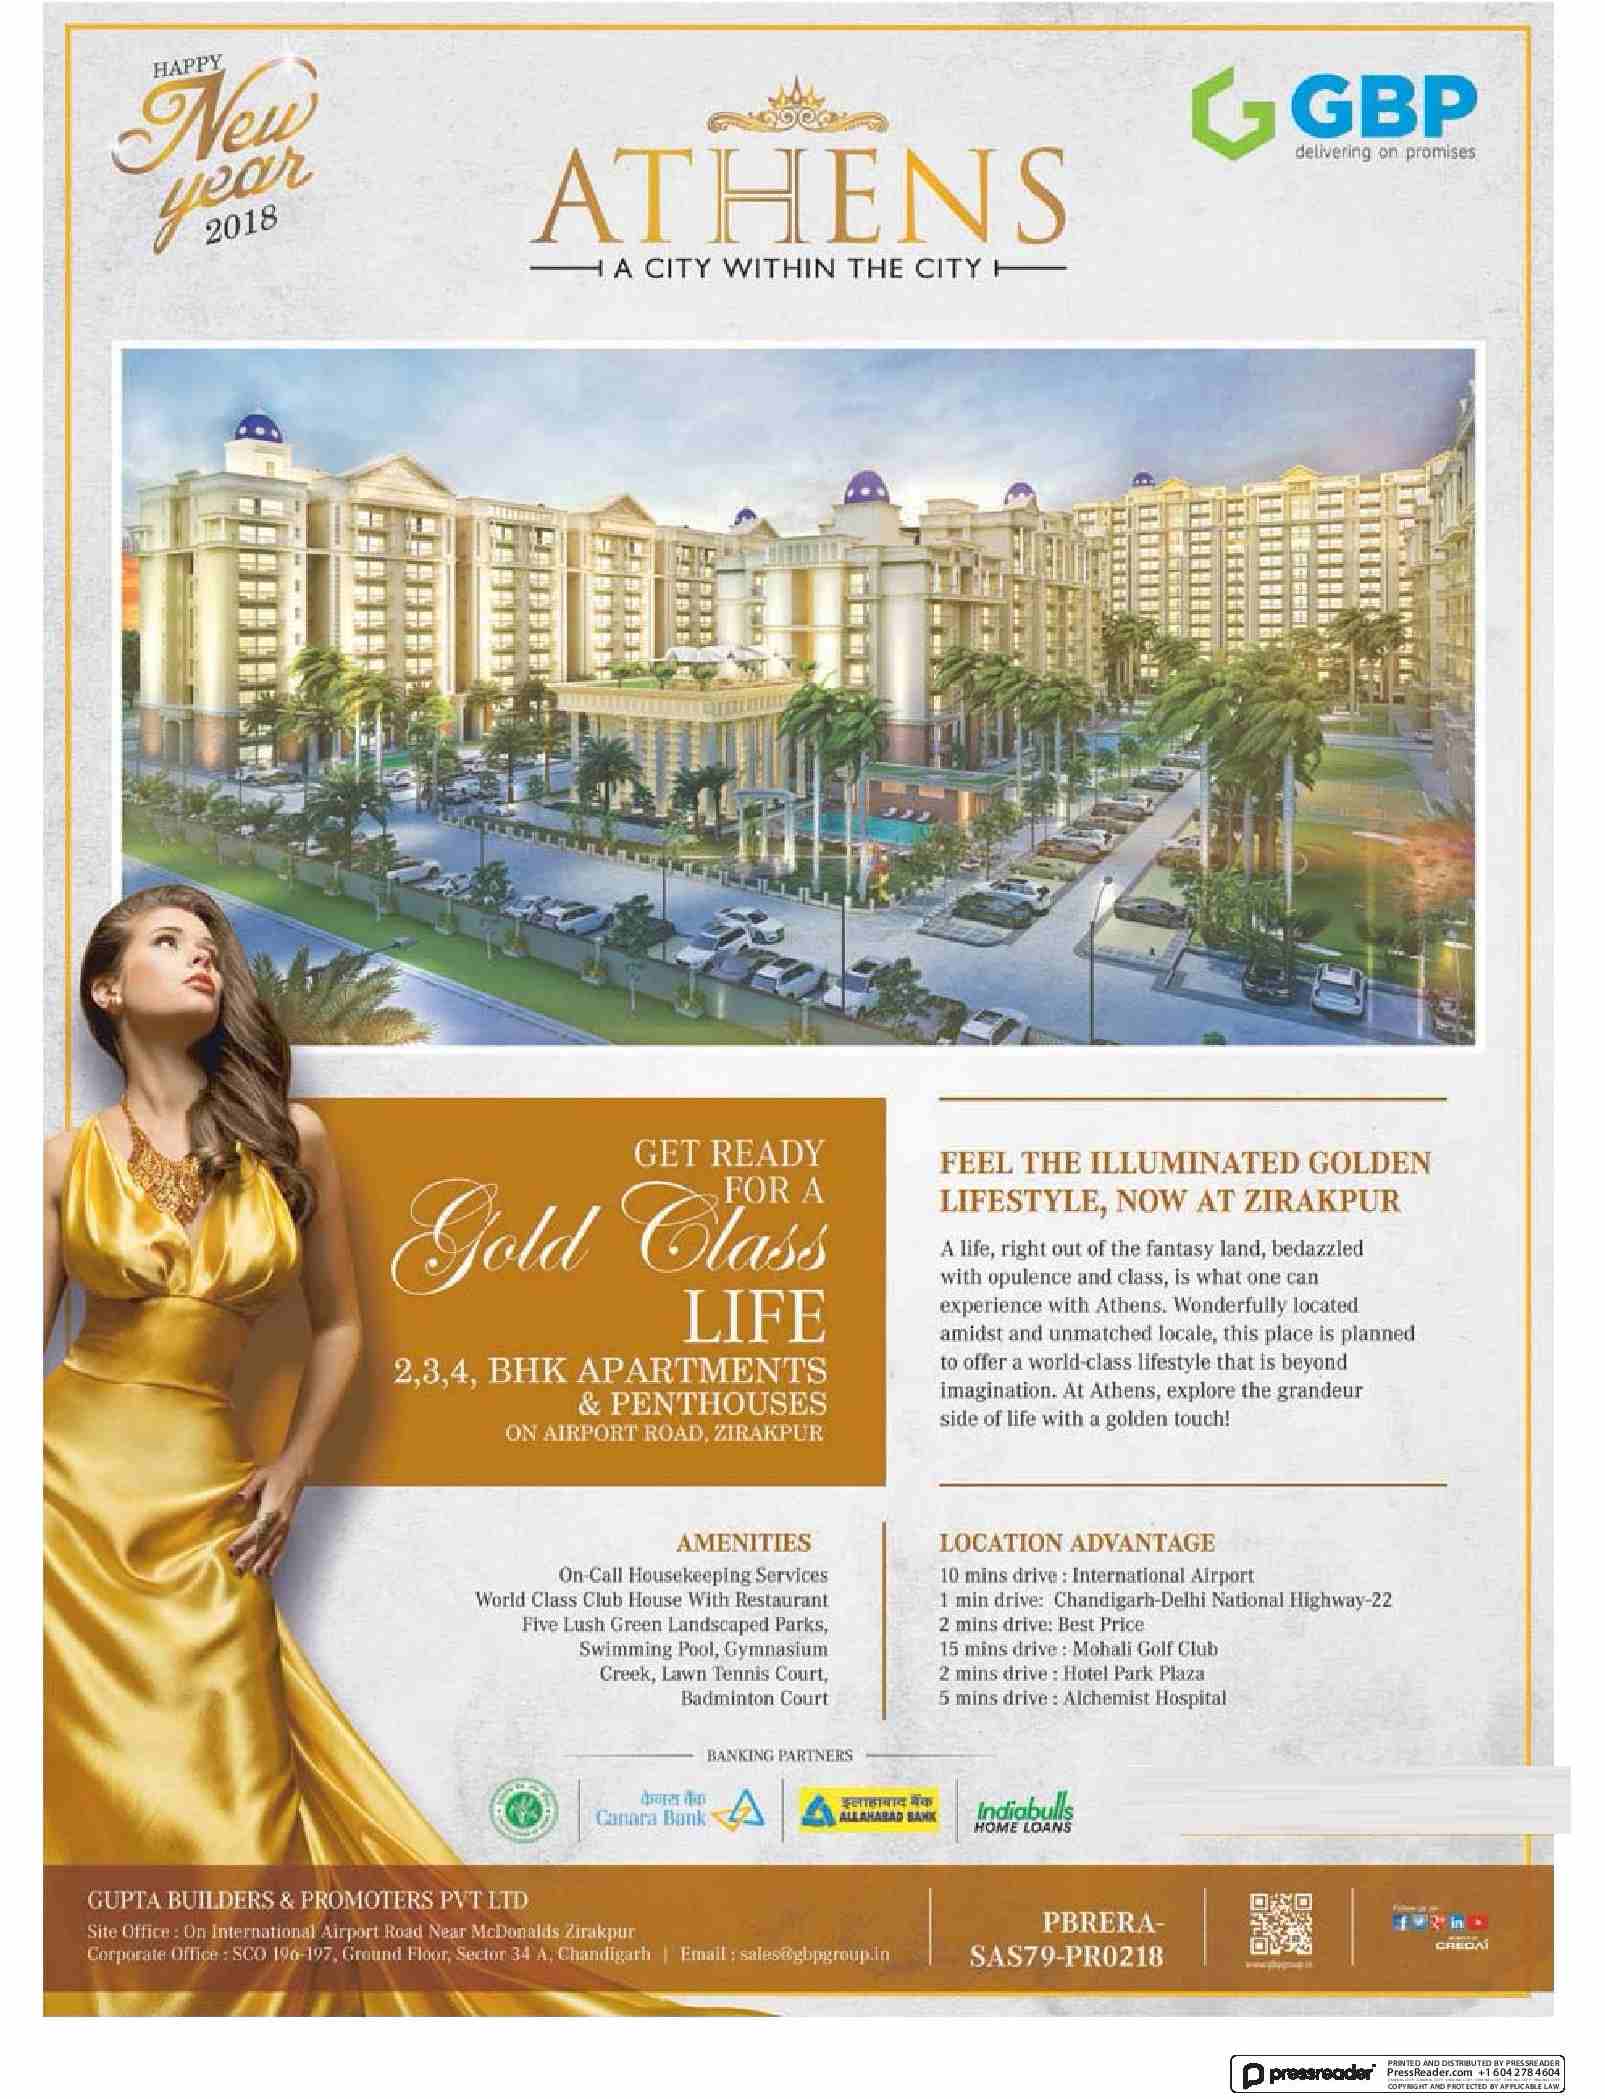 Feel the illuminated golden lifestyle now at GBP Athens in Chandigarh Update